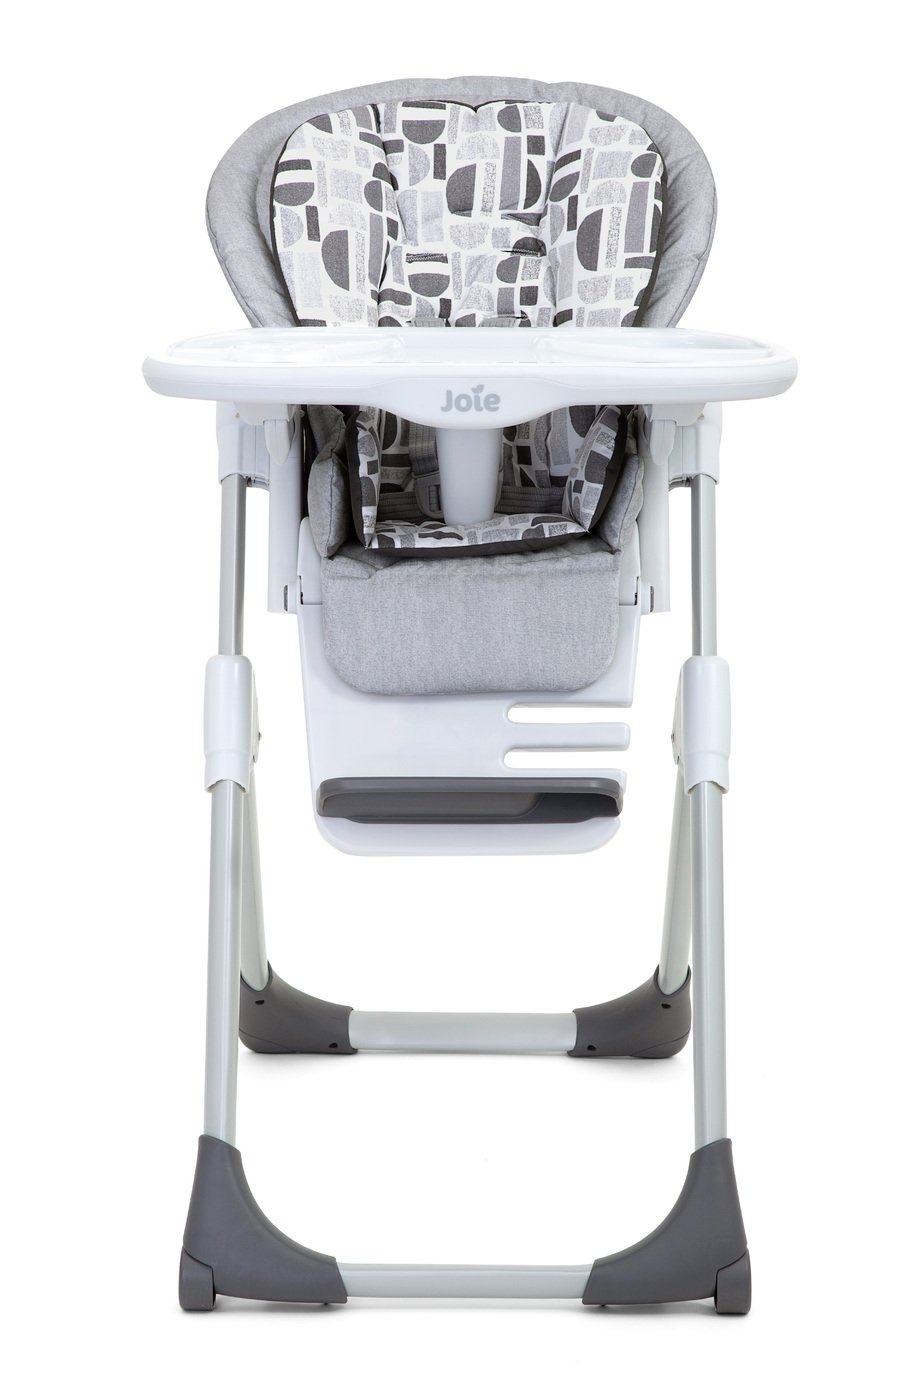 Joie Mimzy 2-in-1 Highchair Review